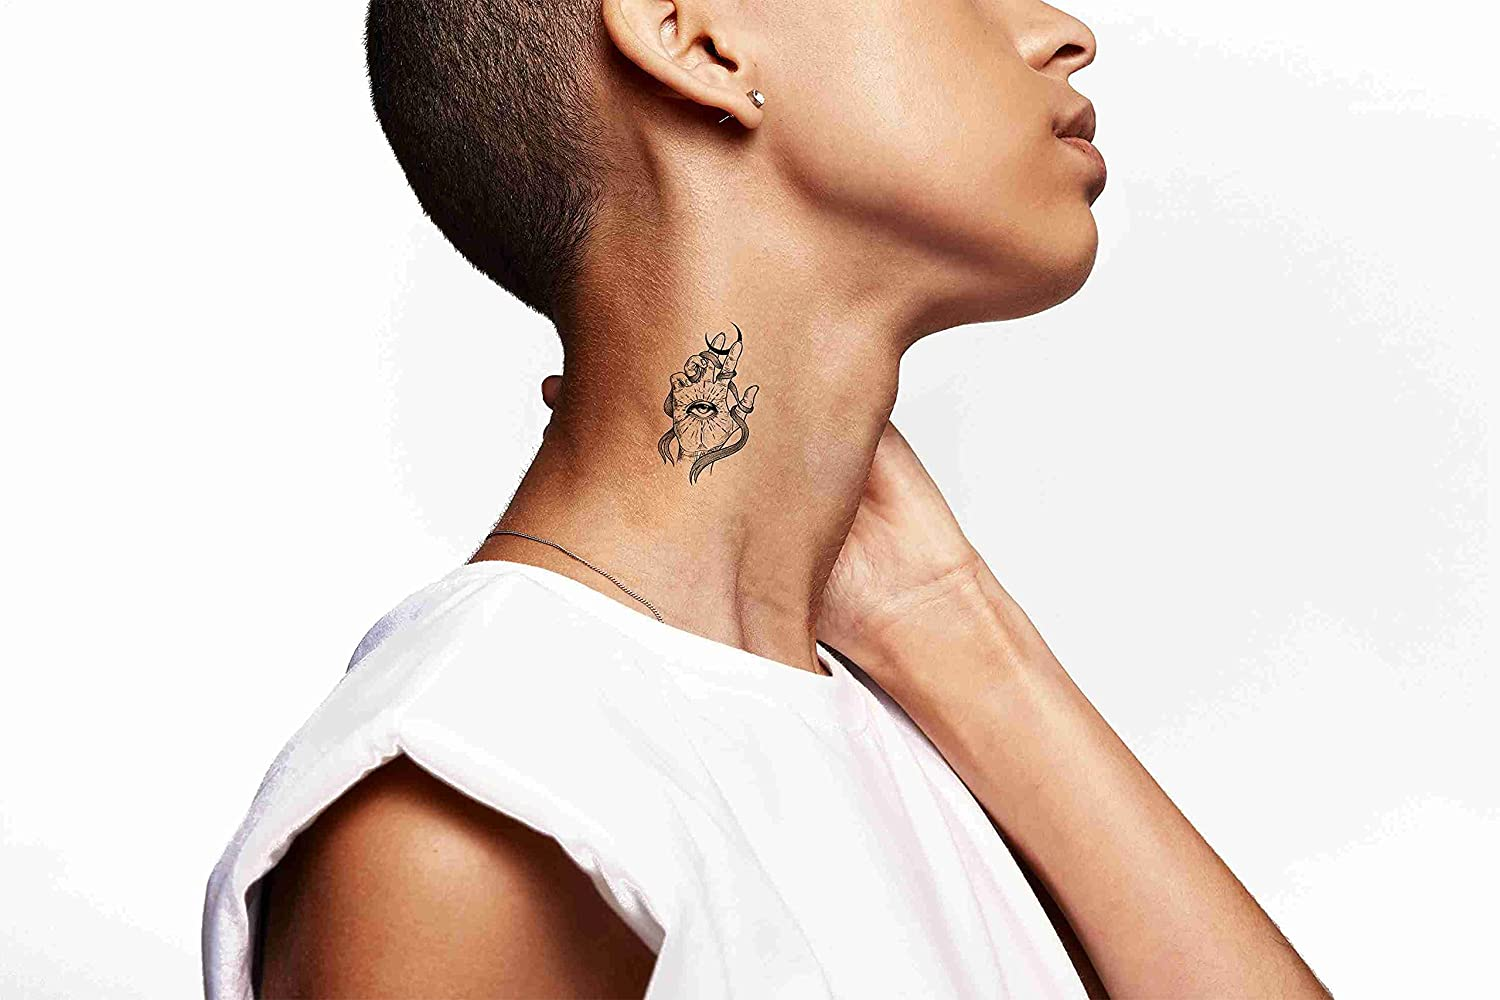 35+ Creative Neck Tattoo Designs For Men (Check Number Ten)